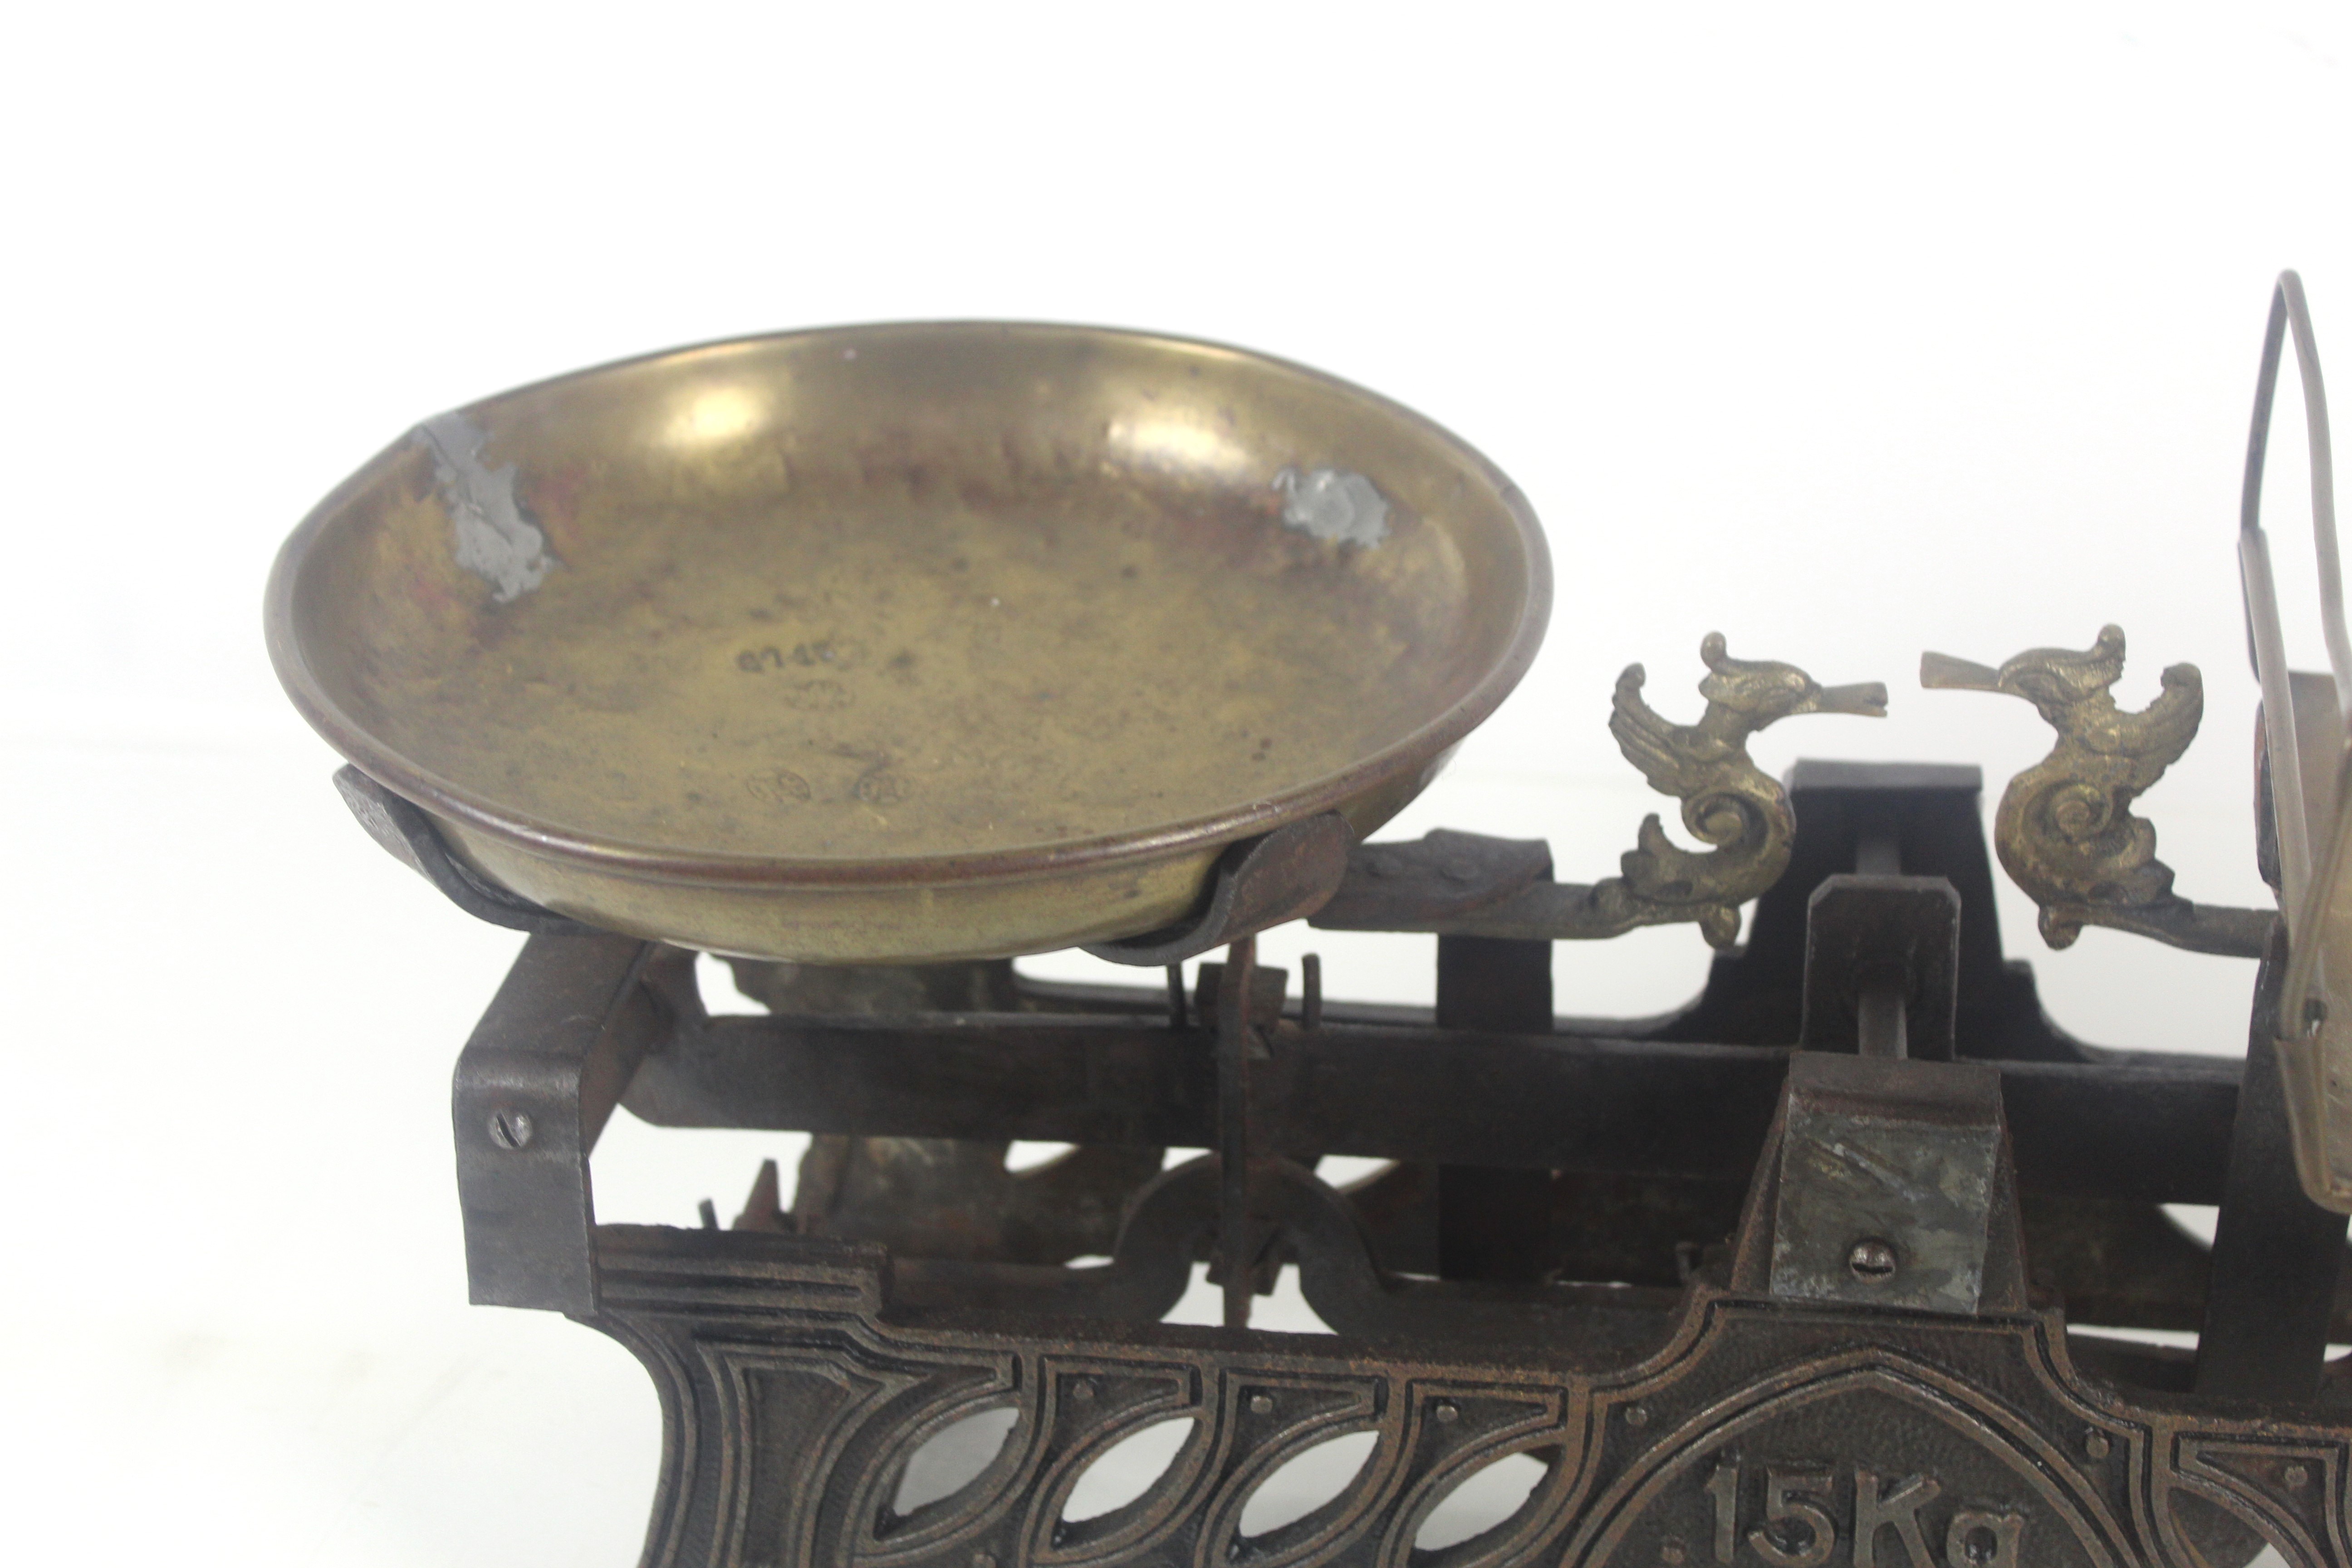 A set of vintage 15kg shop scales with brass pans - Image 9 of 15